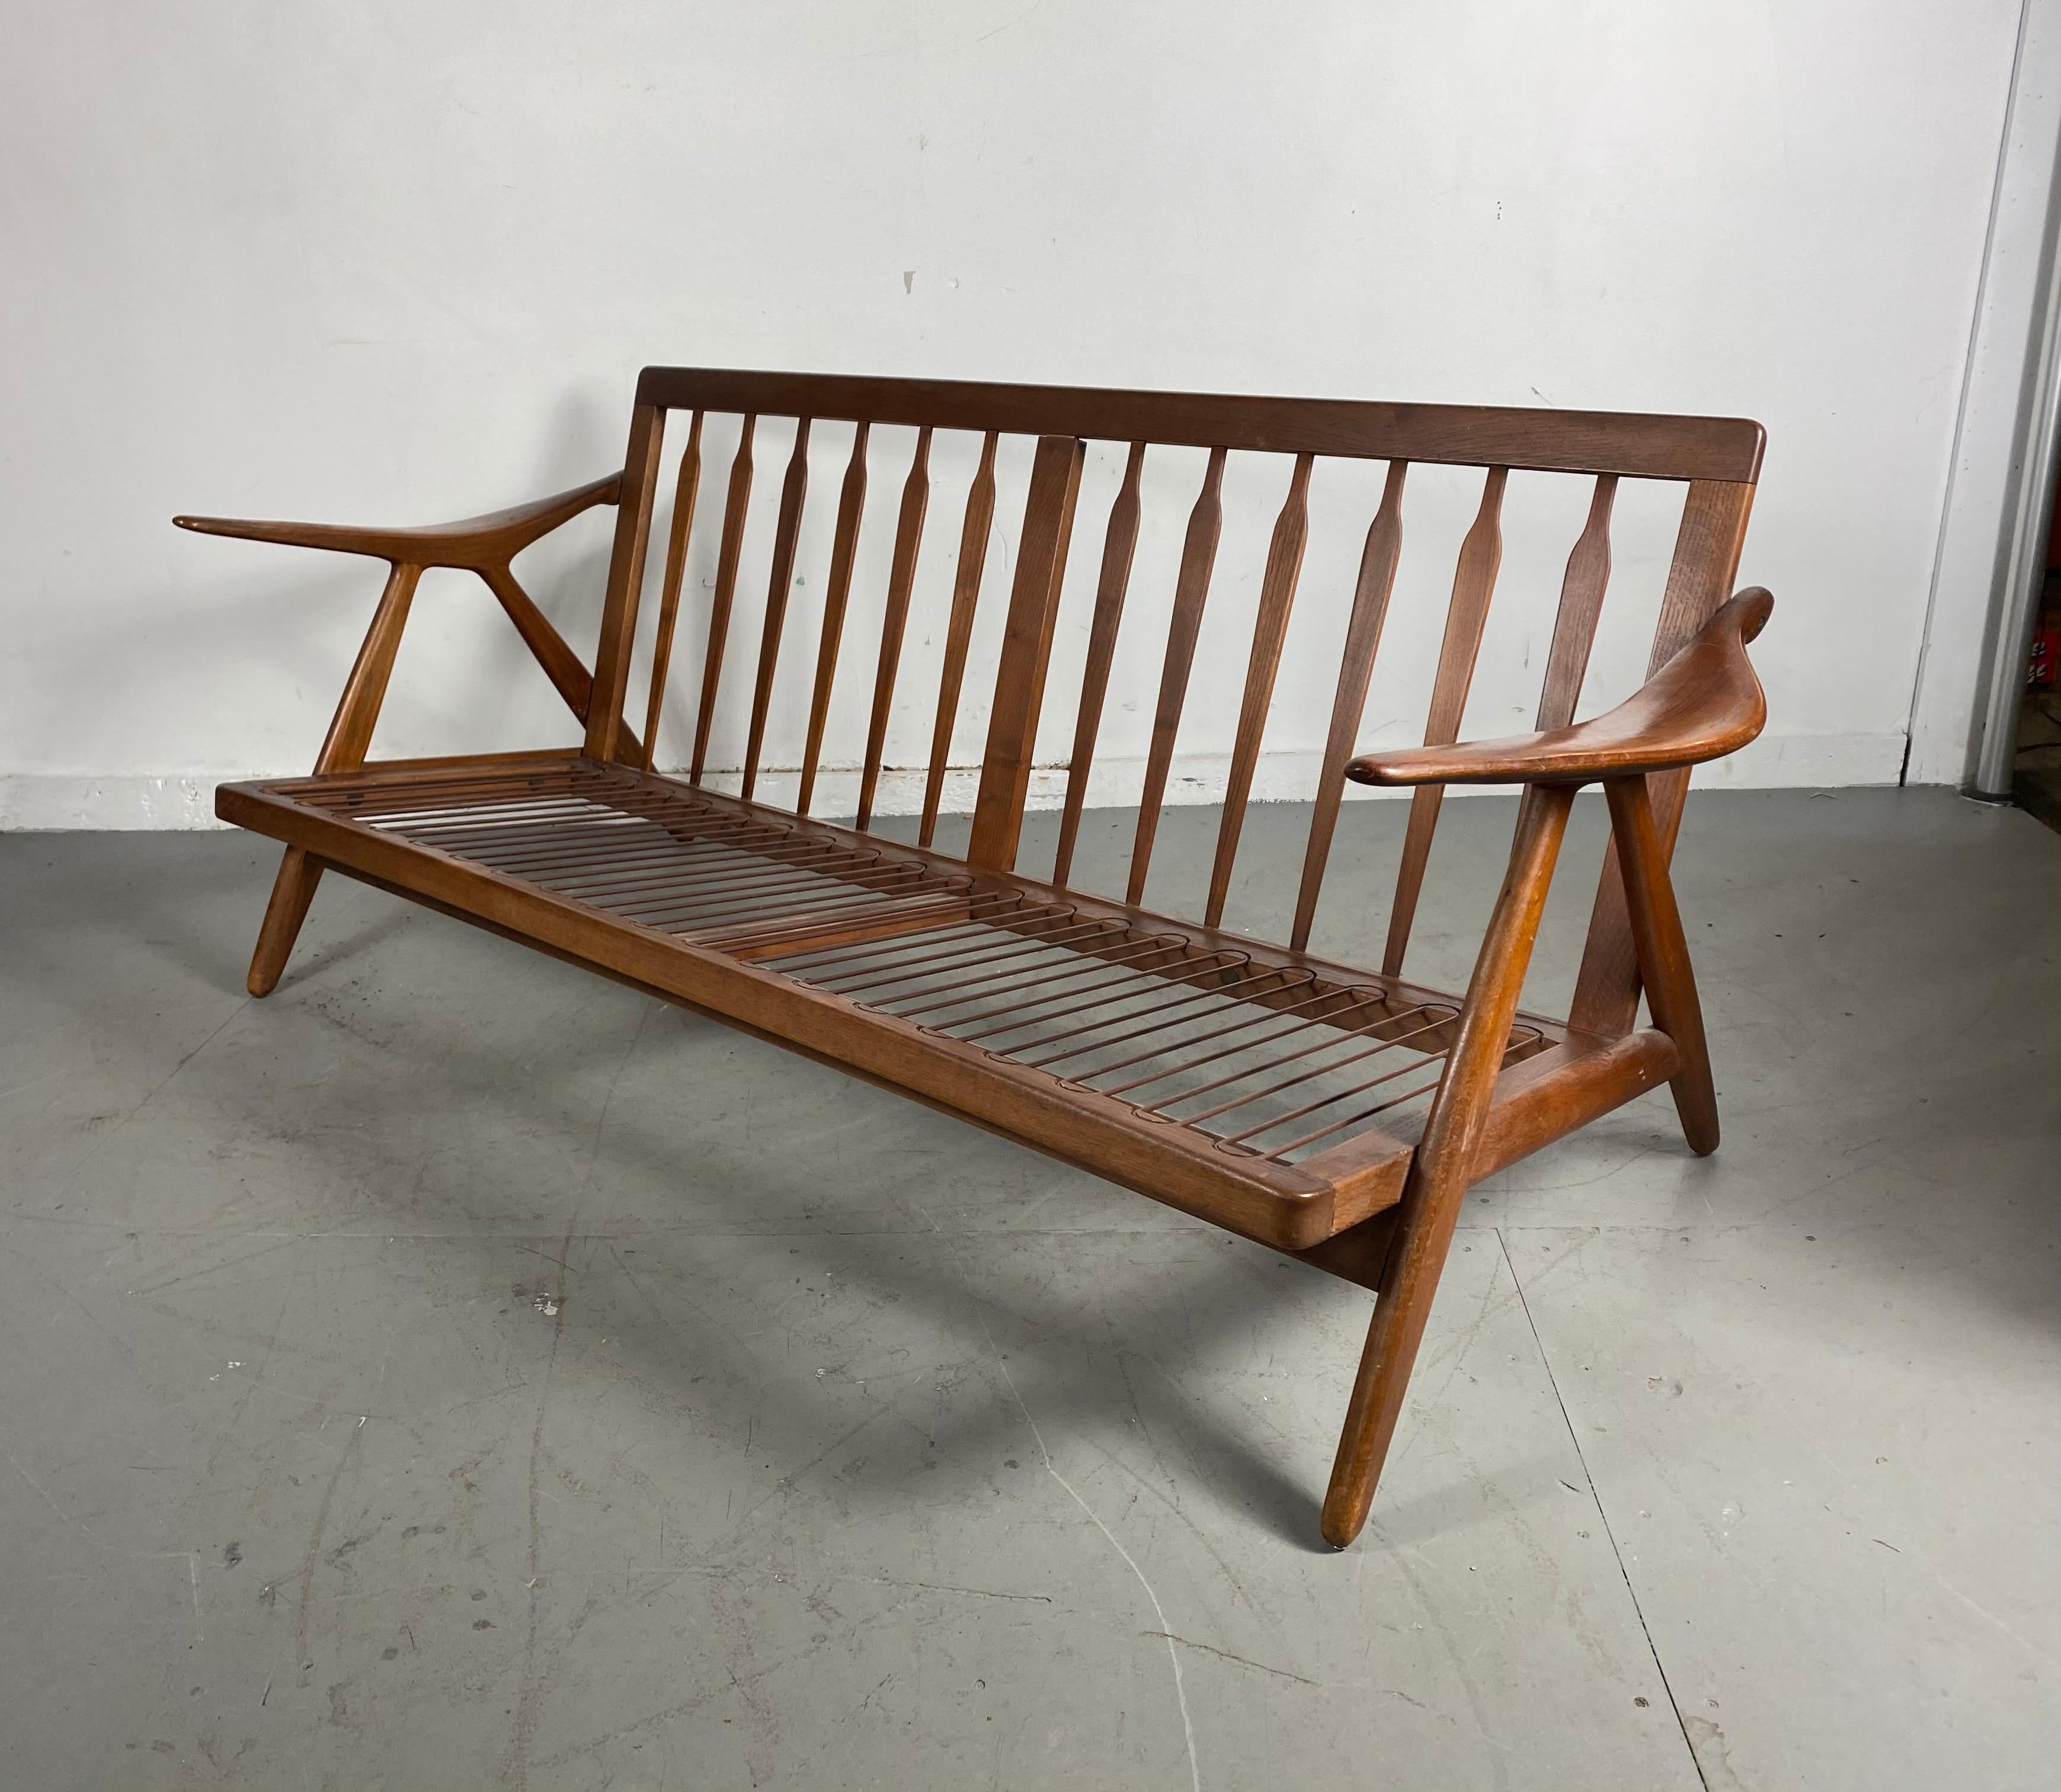 Rare Danish modern sofa (frame) designed by Arne Hovmand Olsen for Mogens Kold. In original estate condition. Retain original finish, patina showing just the right amount of cosmetic wear to finish, minor nicks and scuffs etc. chic, stylish,